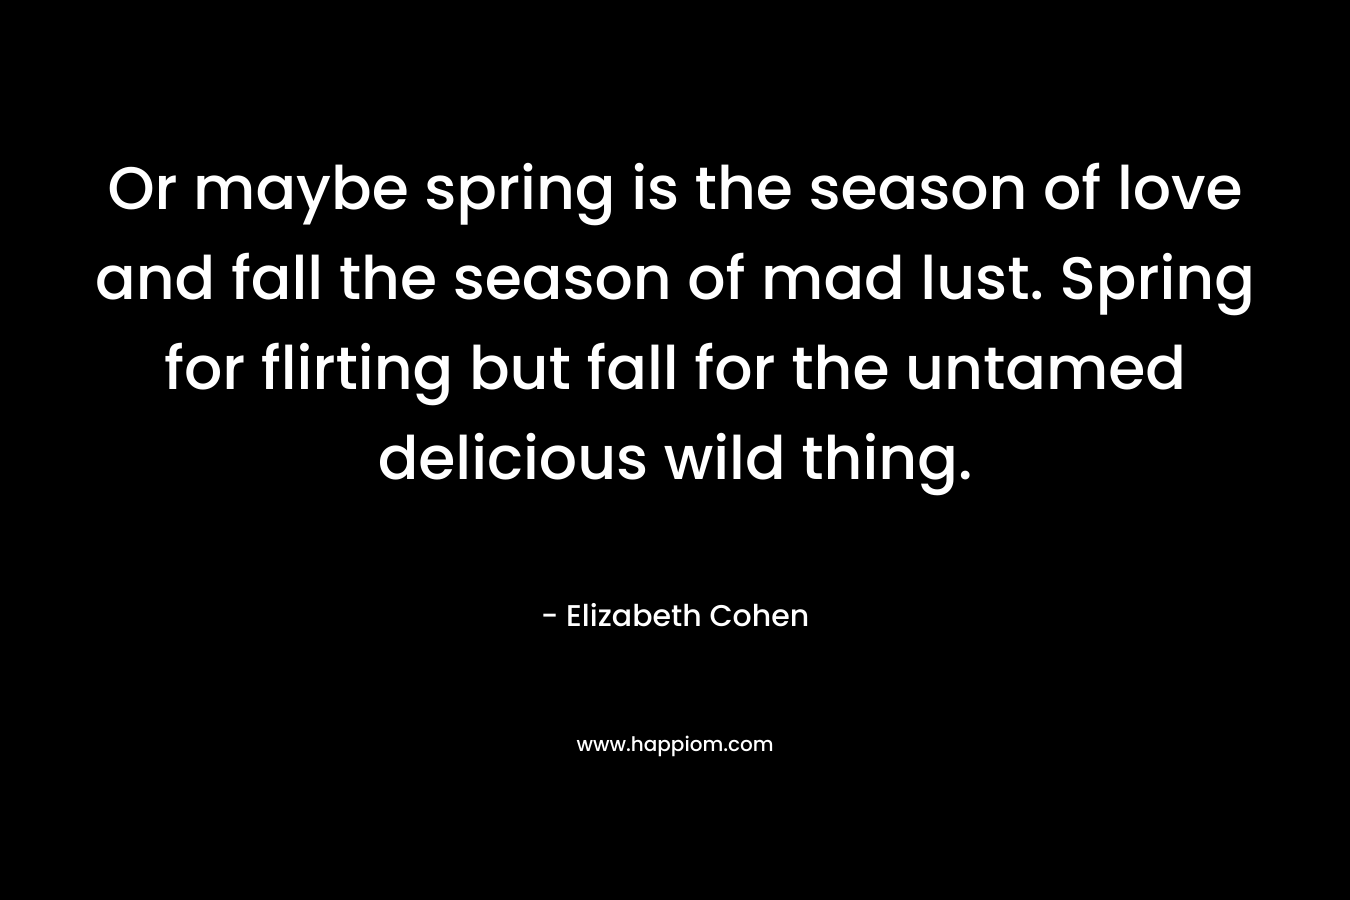 Or maybe spring is the season of love and fall the season of mad lust. Spring for flirting but fall for the untamed delicious wild thing. – Elizabeth Cohen